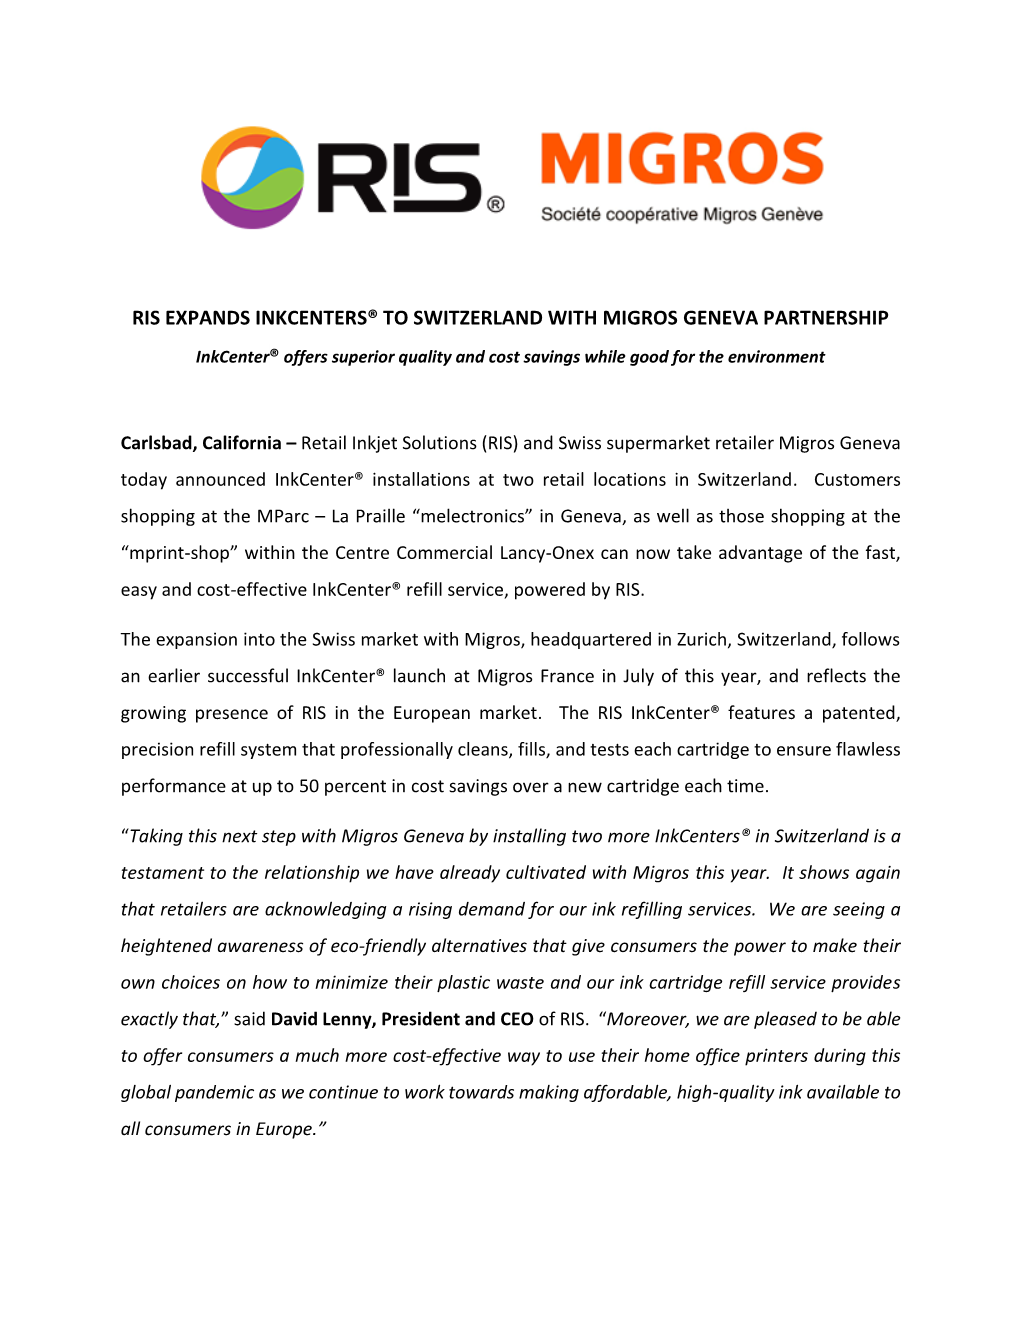 Ris Expands Inkcenters® to Switzerland with Migros Geneva Partnership